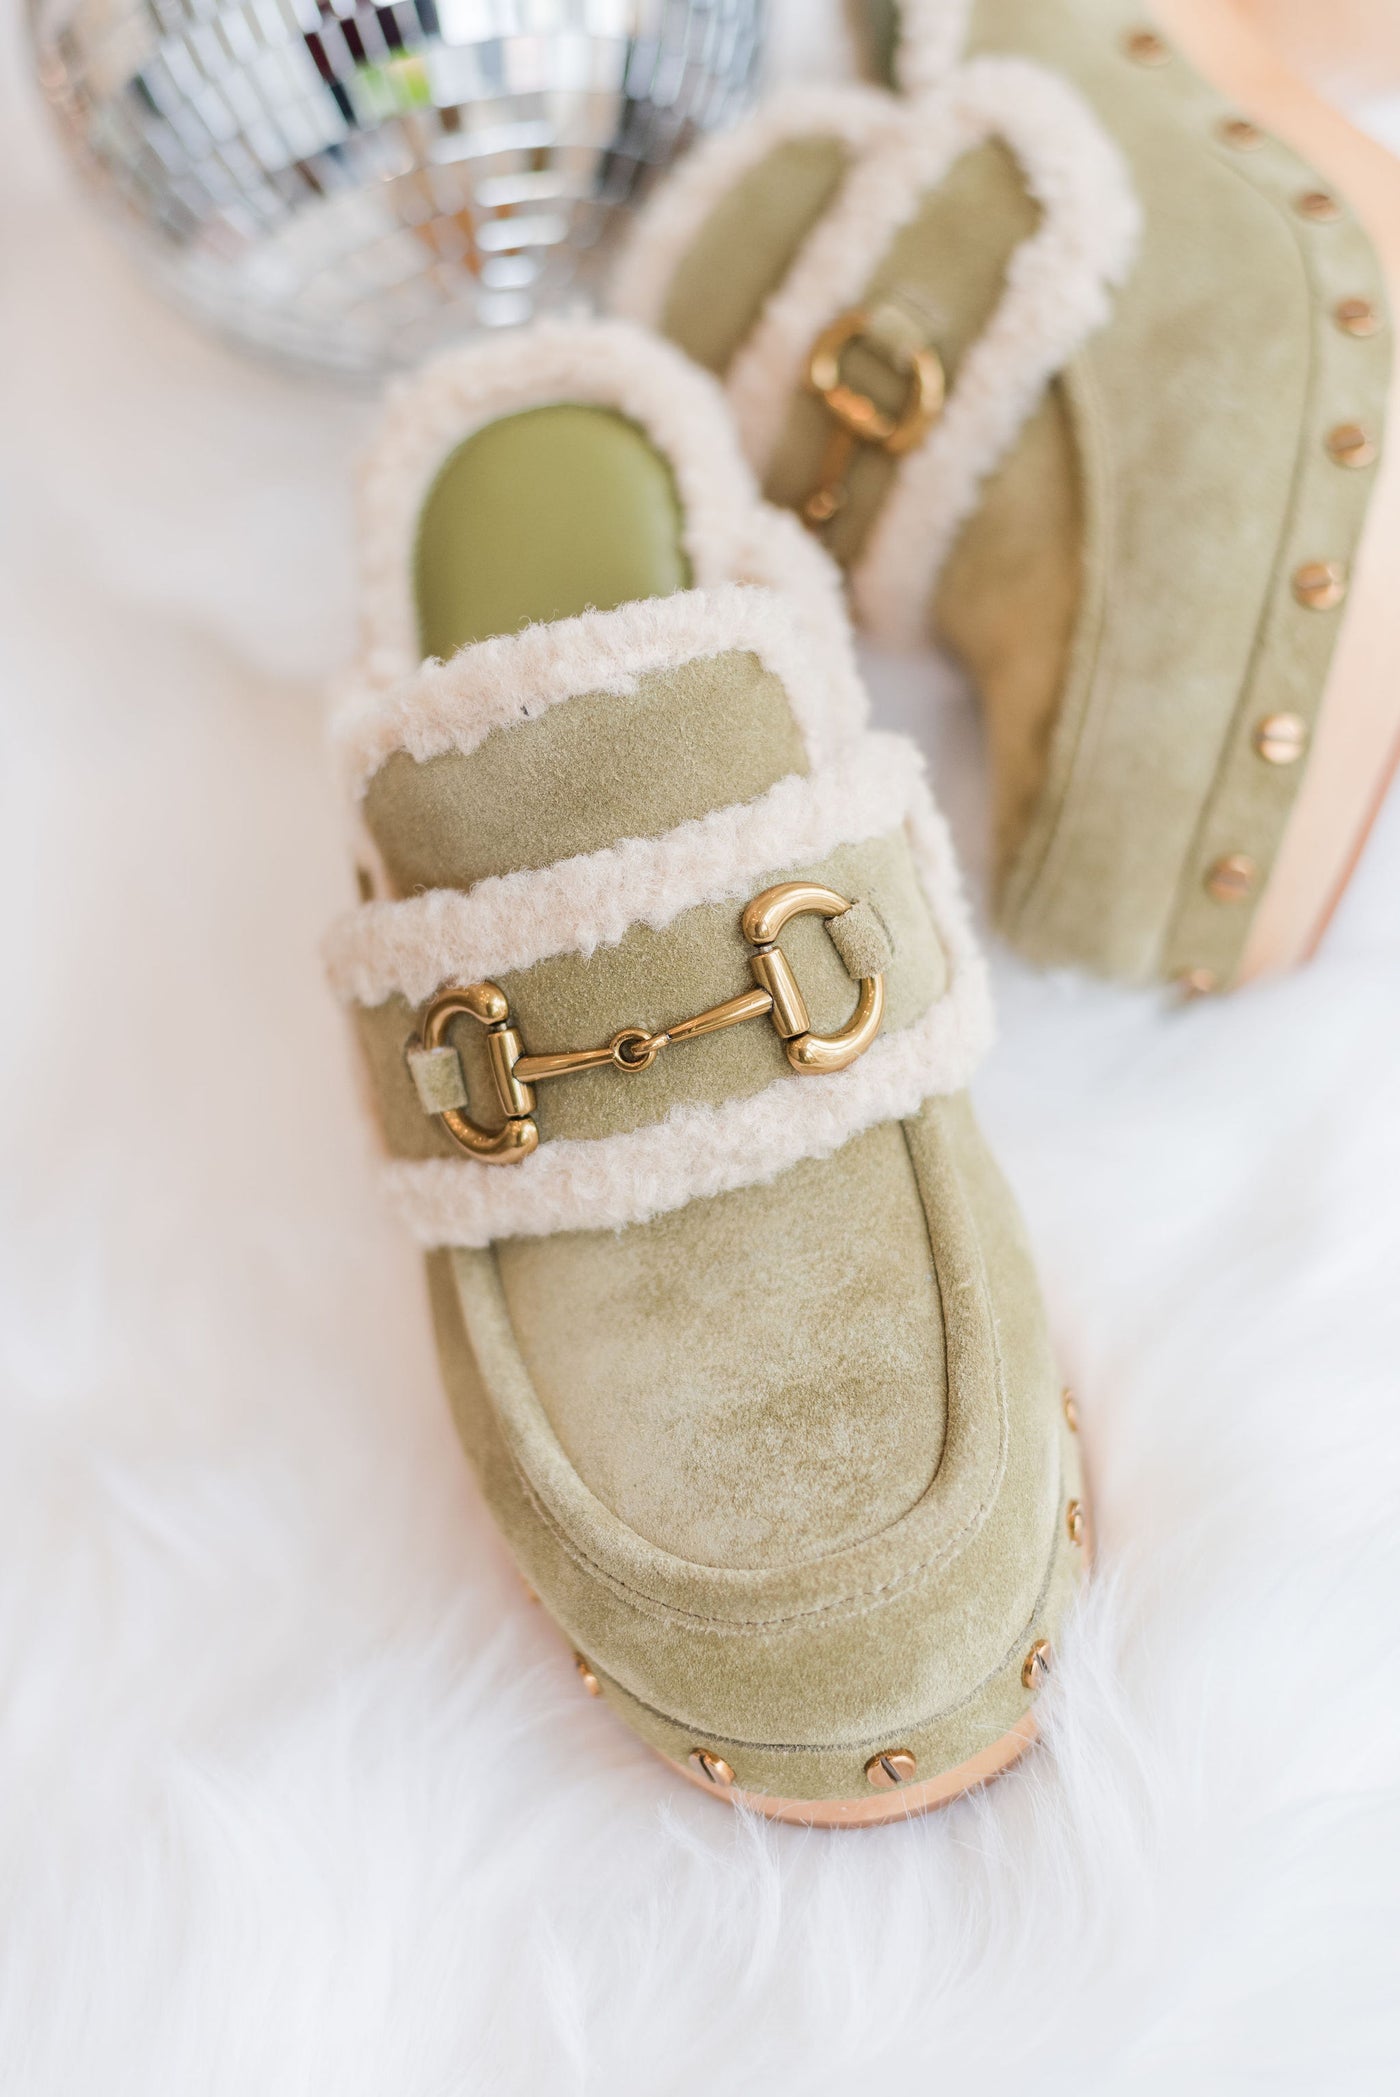 Jeffrey Campbell | Delanie Faux Shearling Mule | Olive Suede - Poppy and Stella